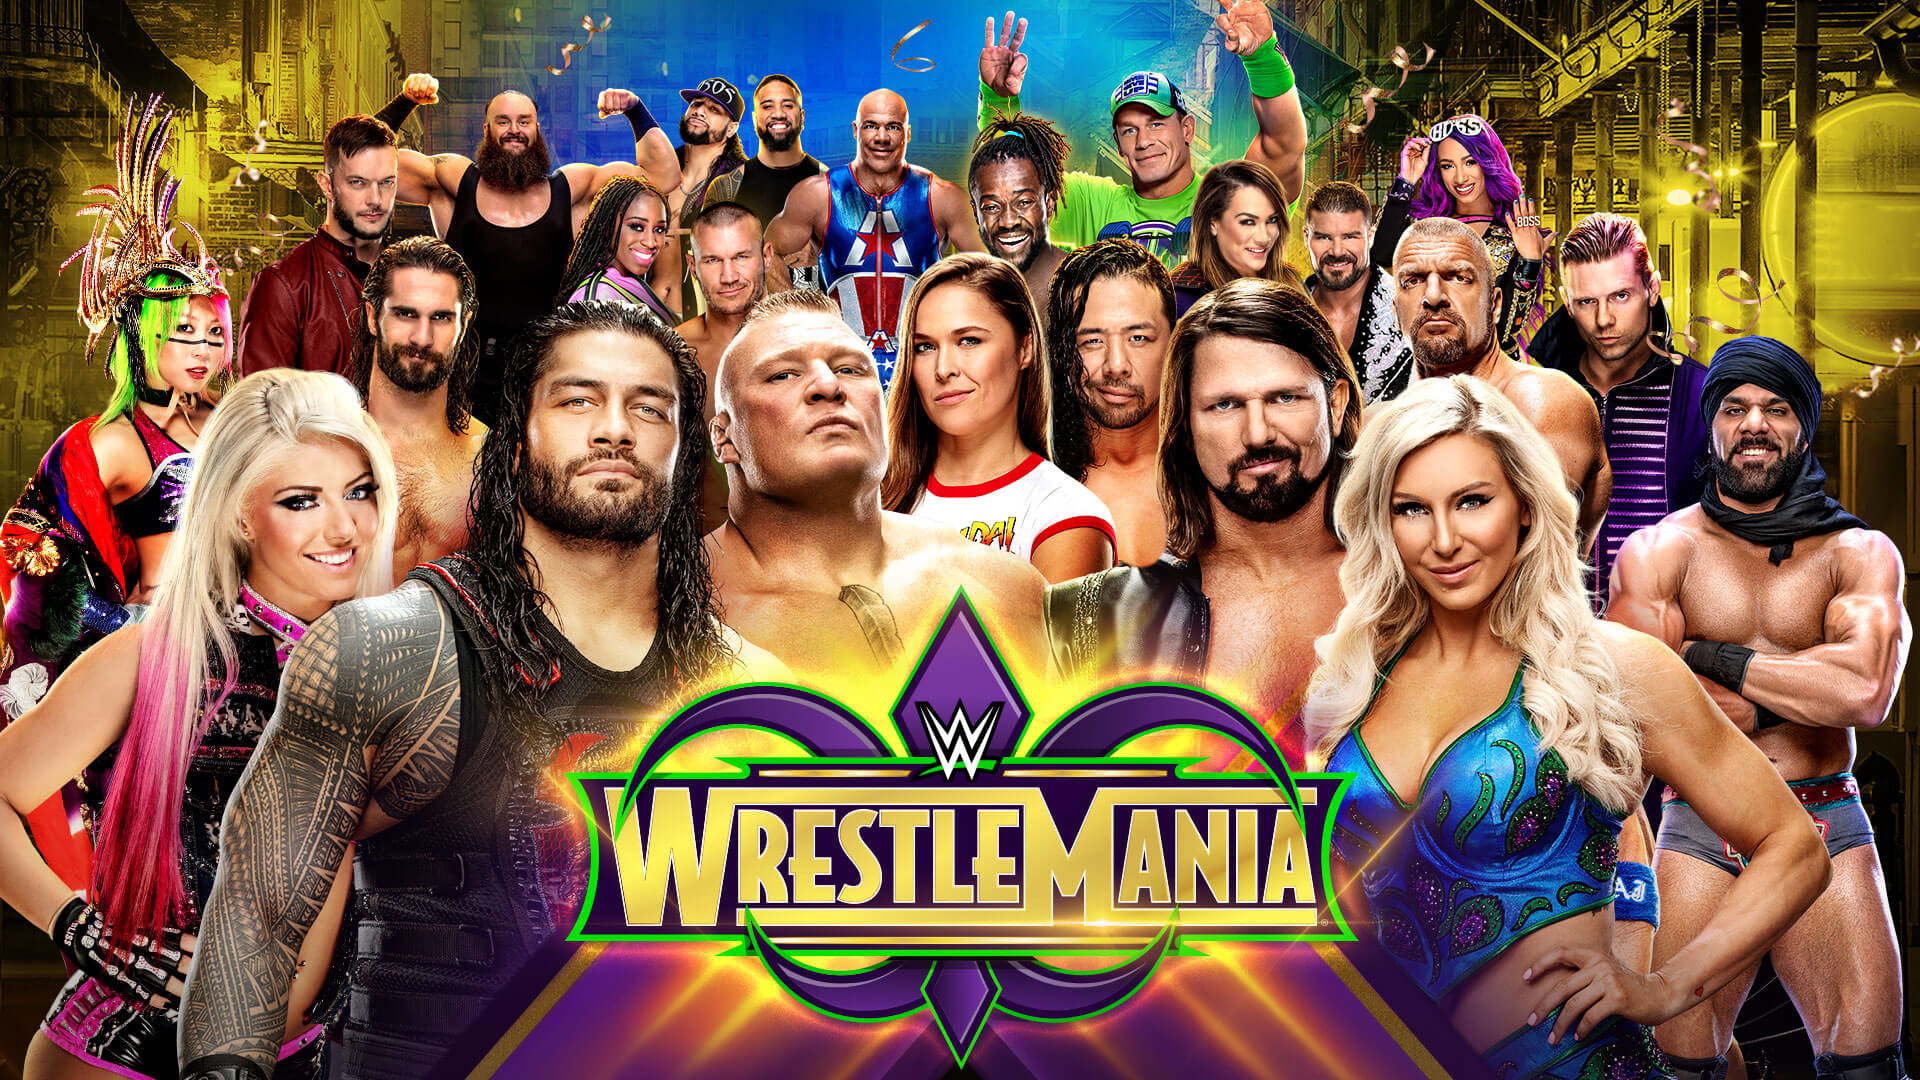 1920x1080 WrestleMania 34 Report - Live from the Mercedes-Benz Superdome - POST  Wrestling | WWE NXT NJPW UFC Podcasts, News & Reviews